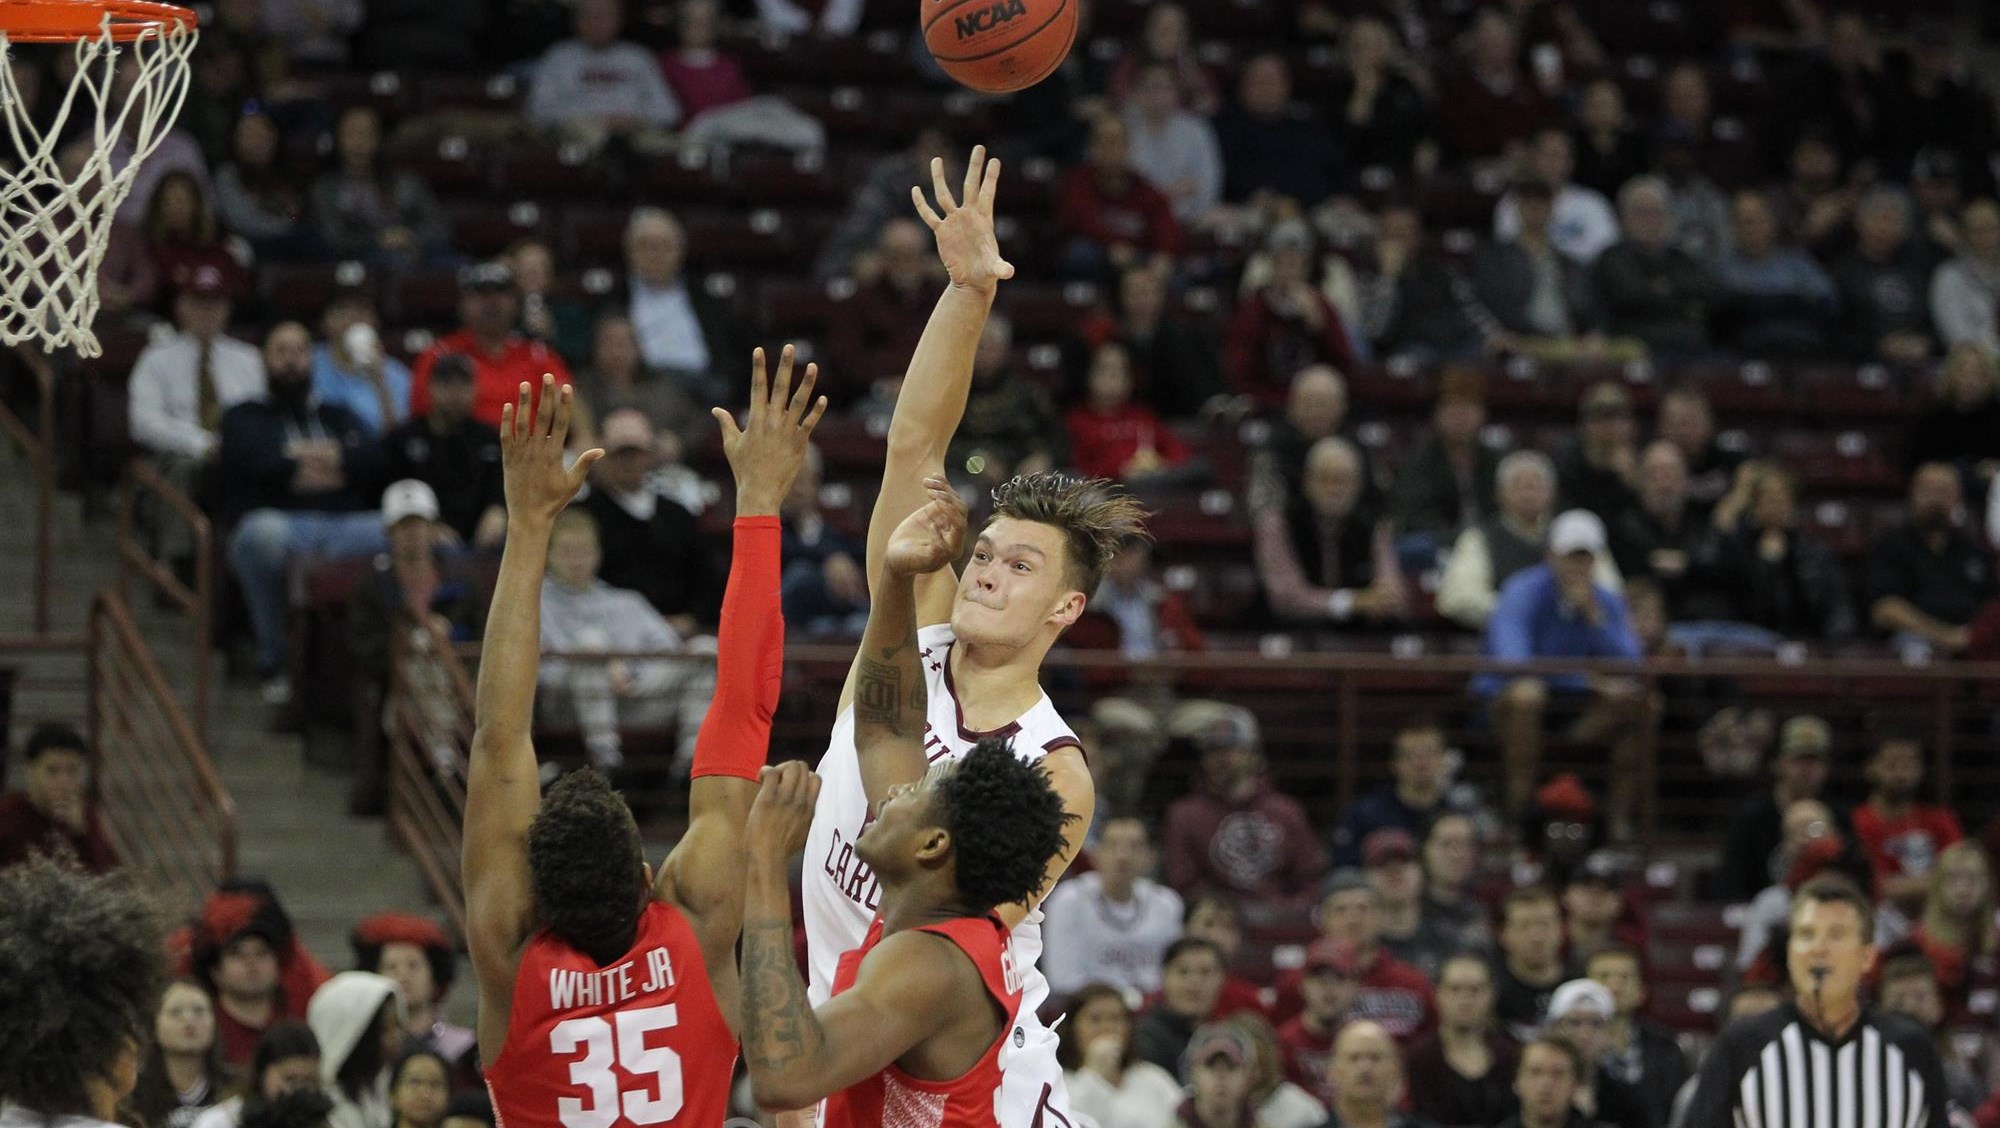 Grimes leads Houston to 76-56 victory over South Carolina